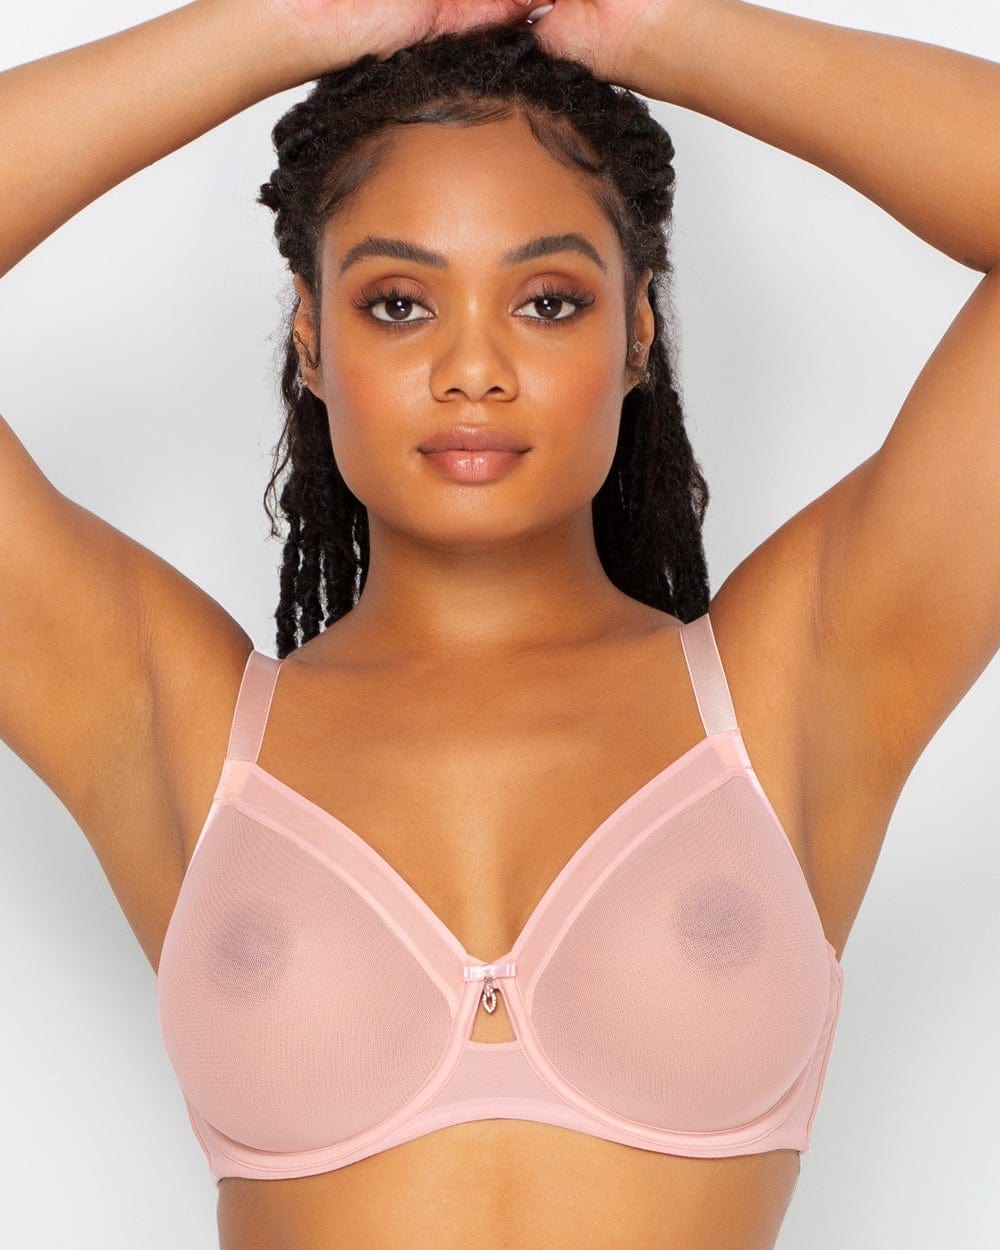 Curvy Couture Plunge Blushing Rose / 34 DD/E Sheer Mesh Unlined Underwire Bra - Blushing Rose